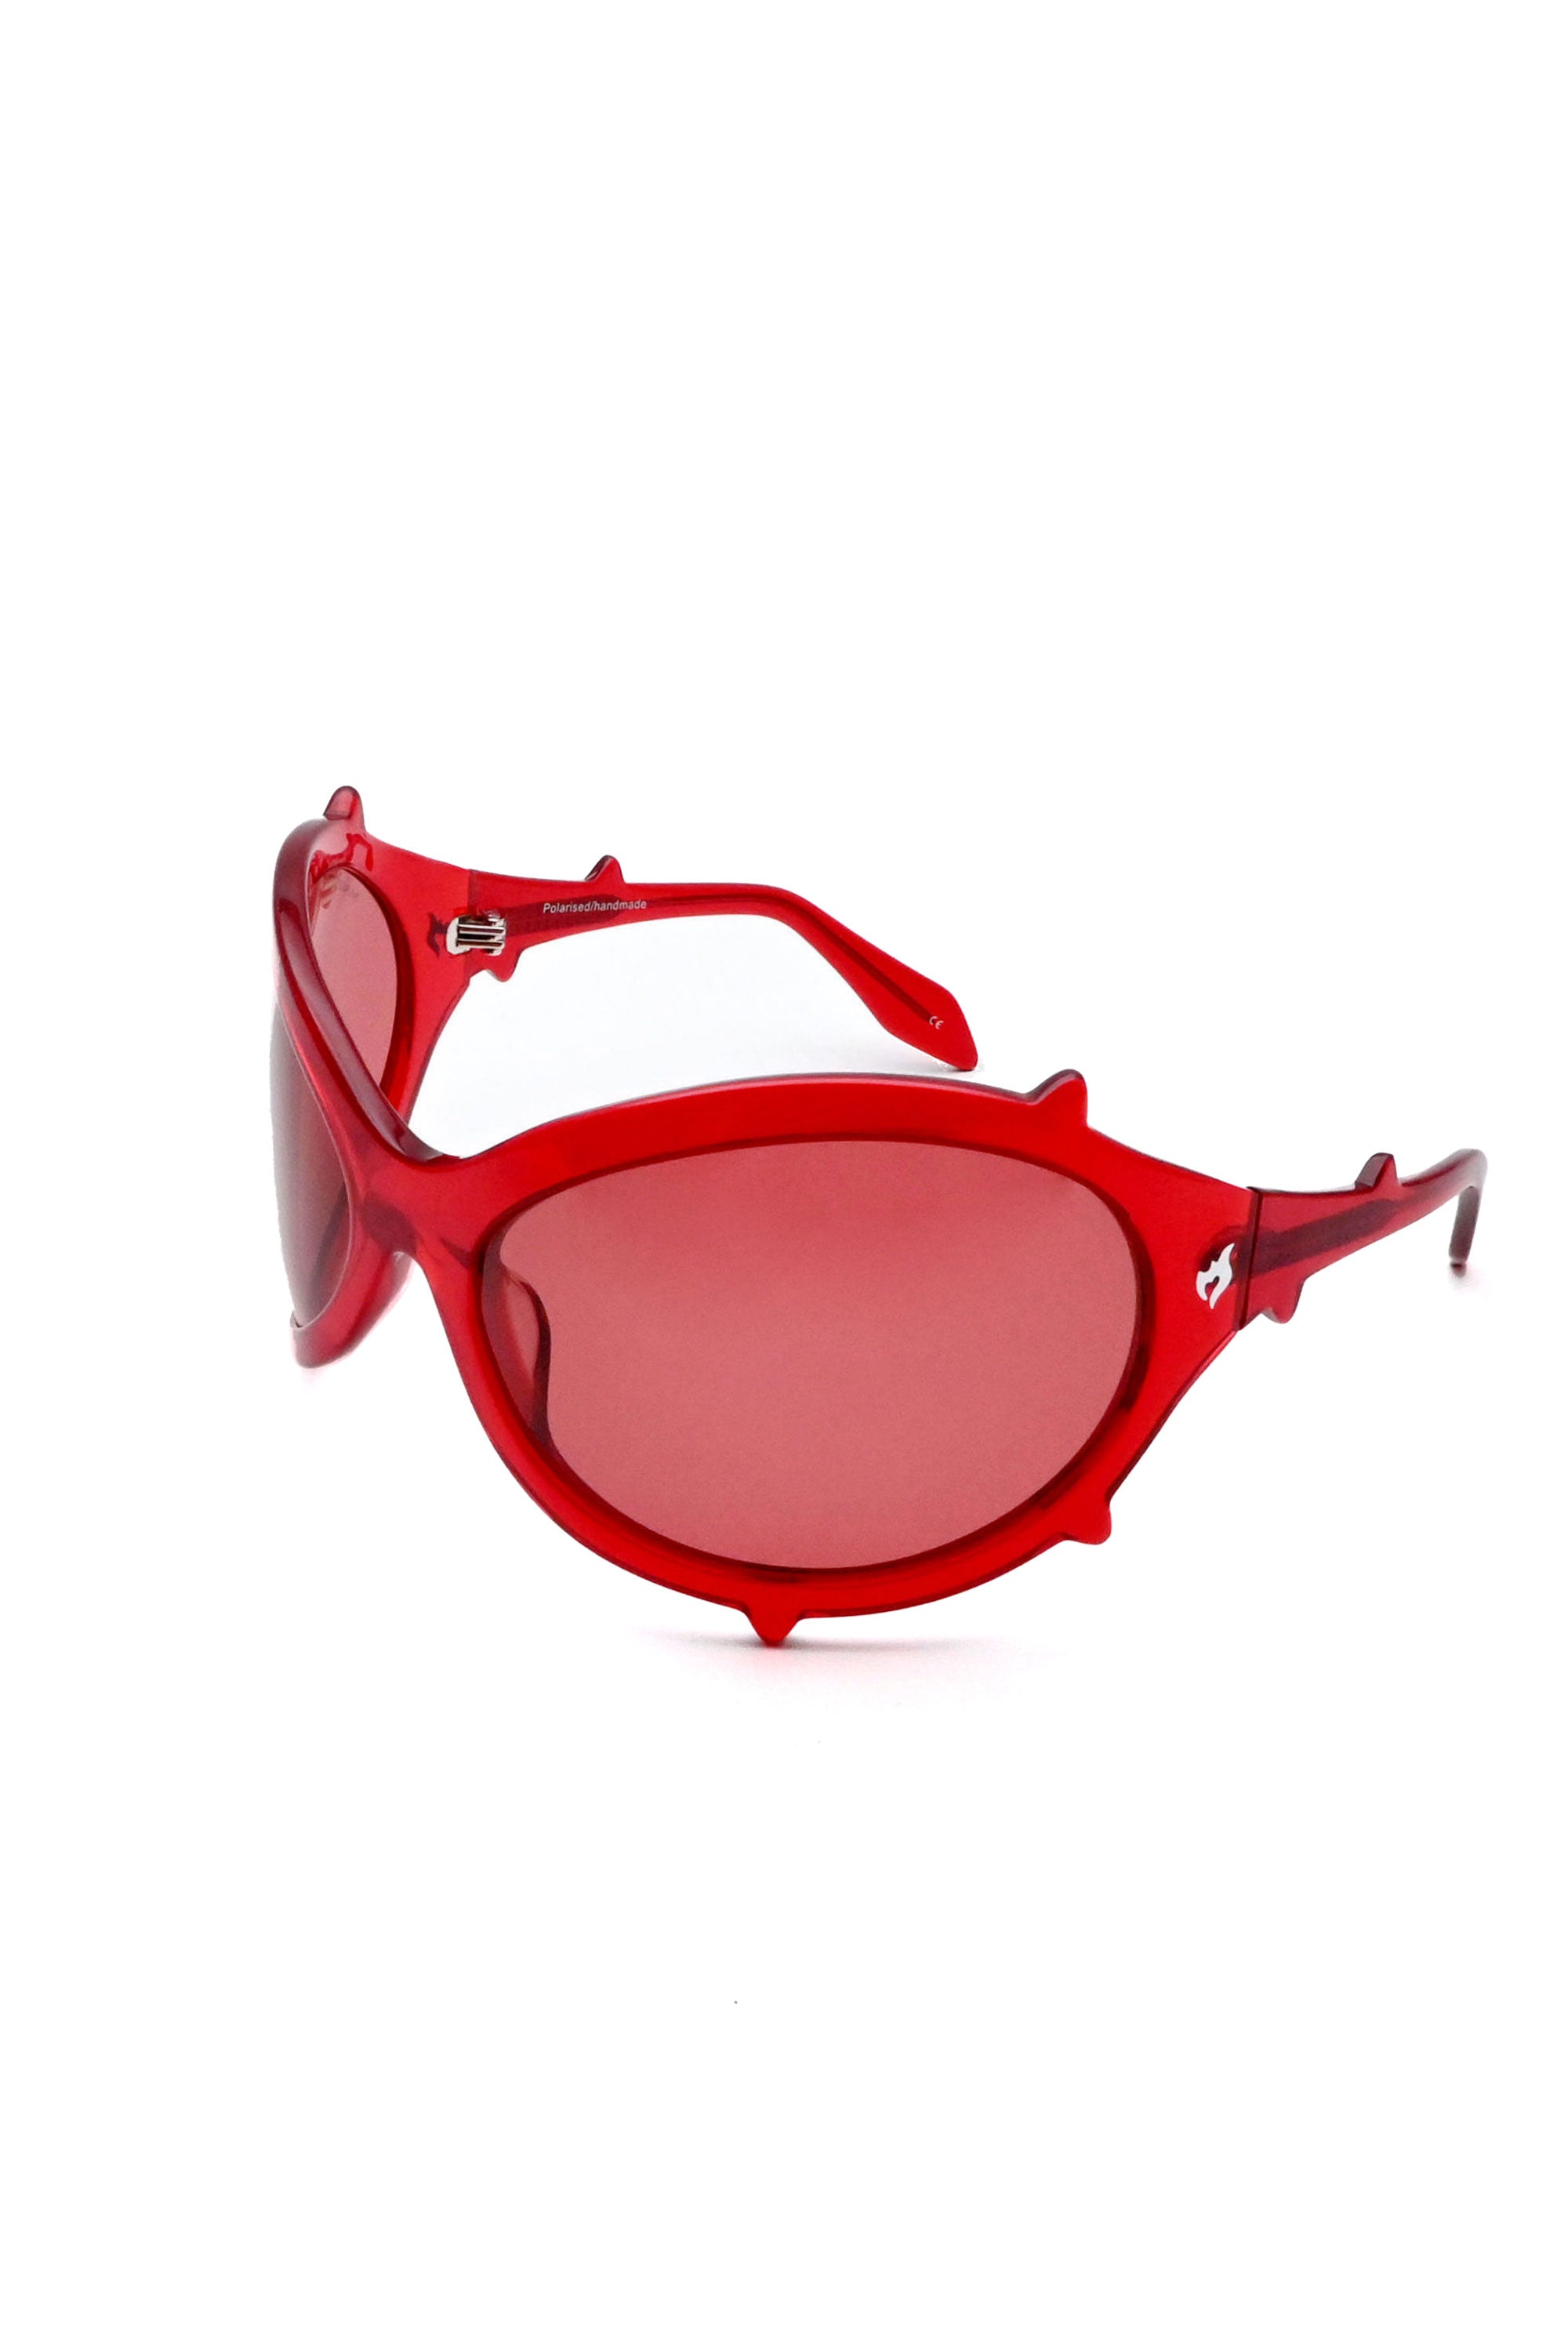 The MAUSTEIN - THE BUG SPIKE SUNGLASSES RED available online with global shipping, and in PAM Stores Melbourne and Sydney.